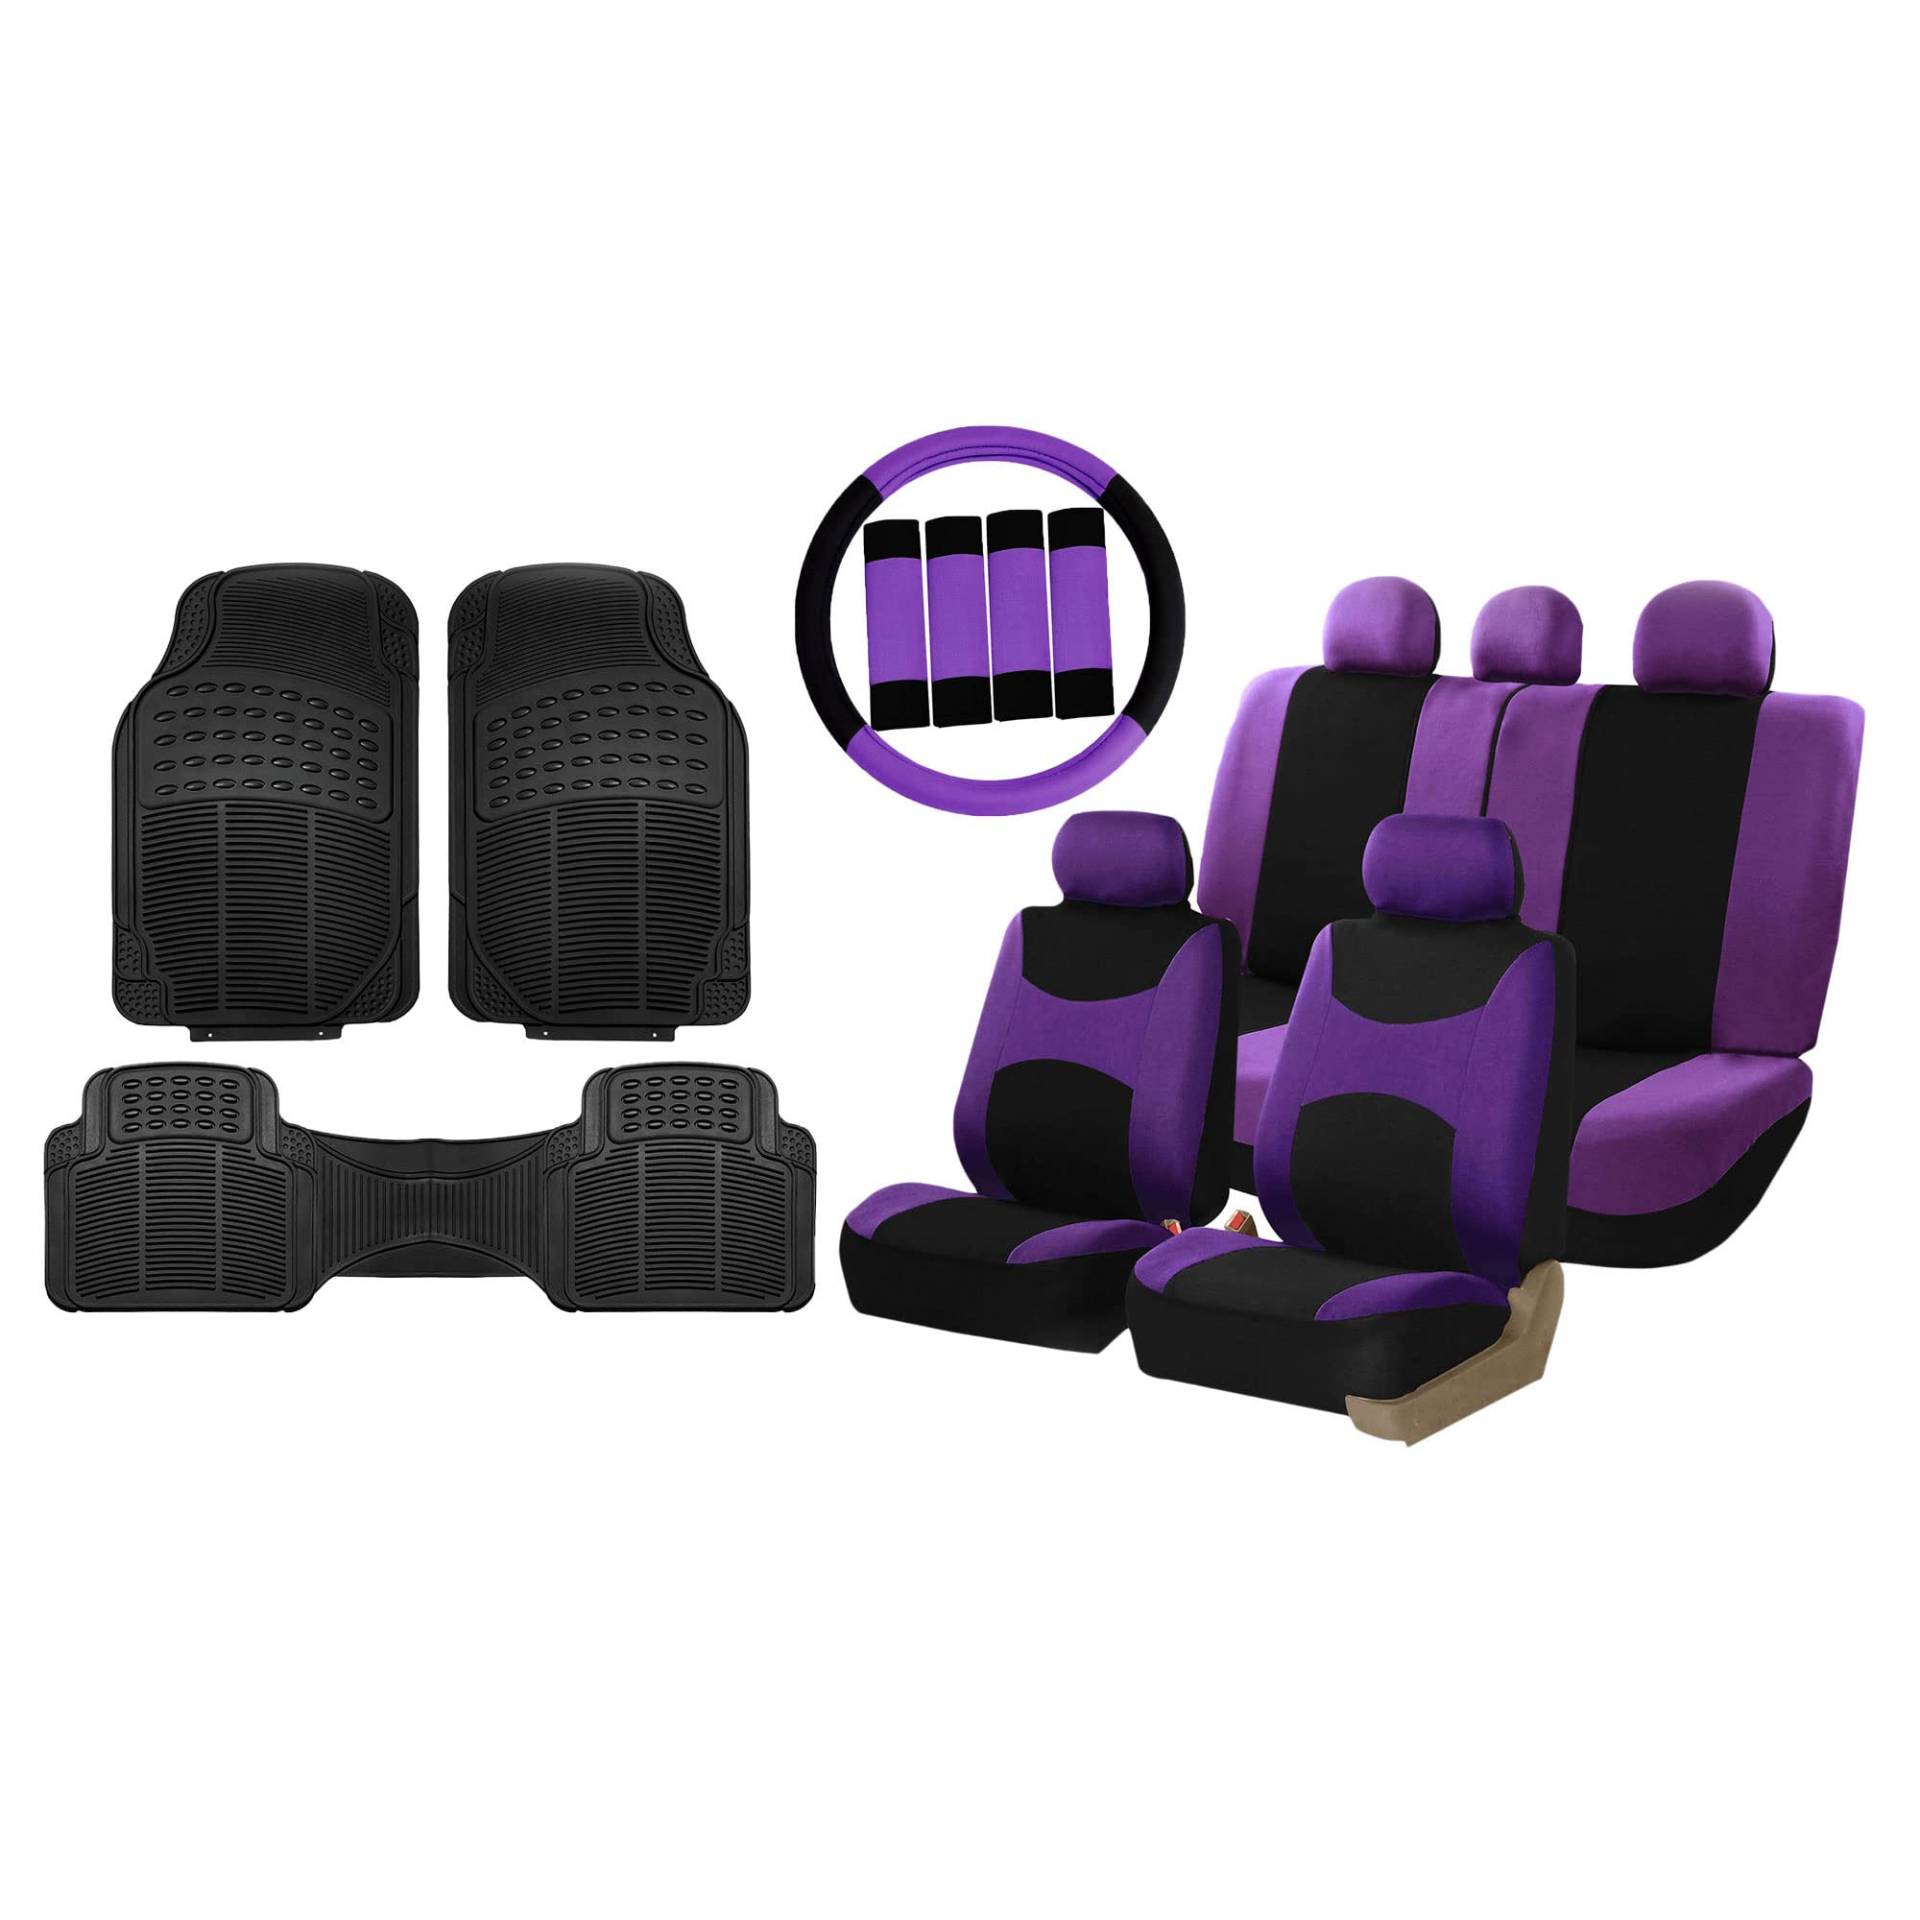 FH Group Light & Breezy Cloth Full Set Car Seat Covers (Purple /Black) Combo Set: Steering Wheel Cover, Seat Belt Pads and Black Vinyl Floor Mats – Universal Fit for Cars Trucks & SUVs von FH GROUP